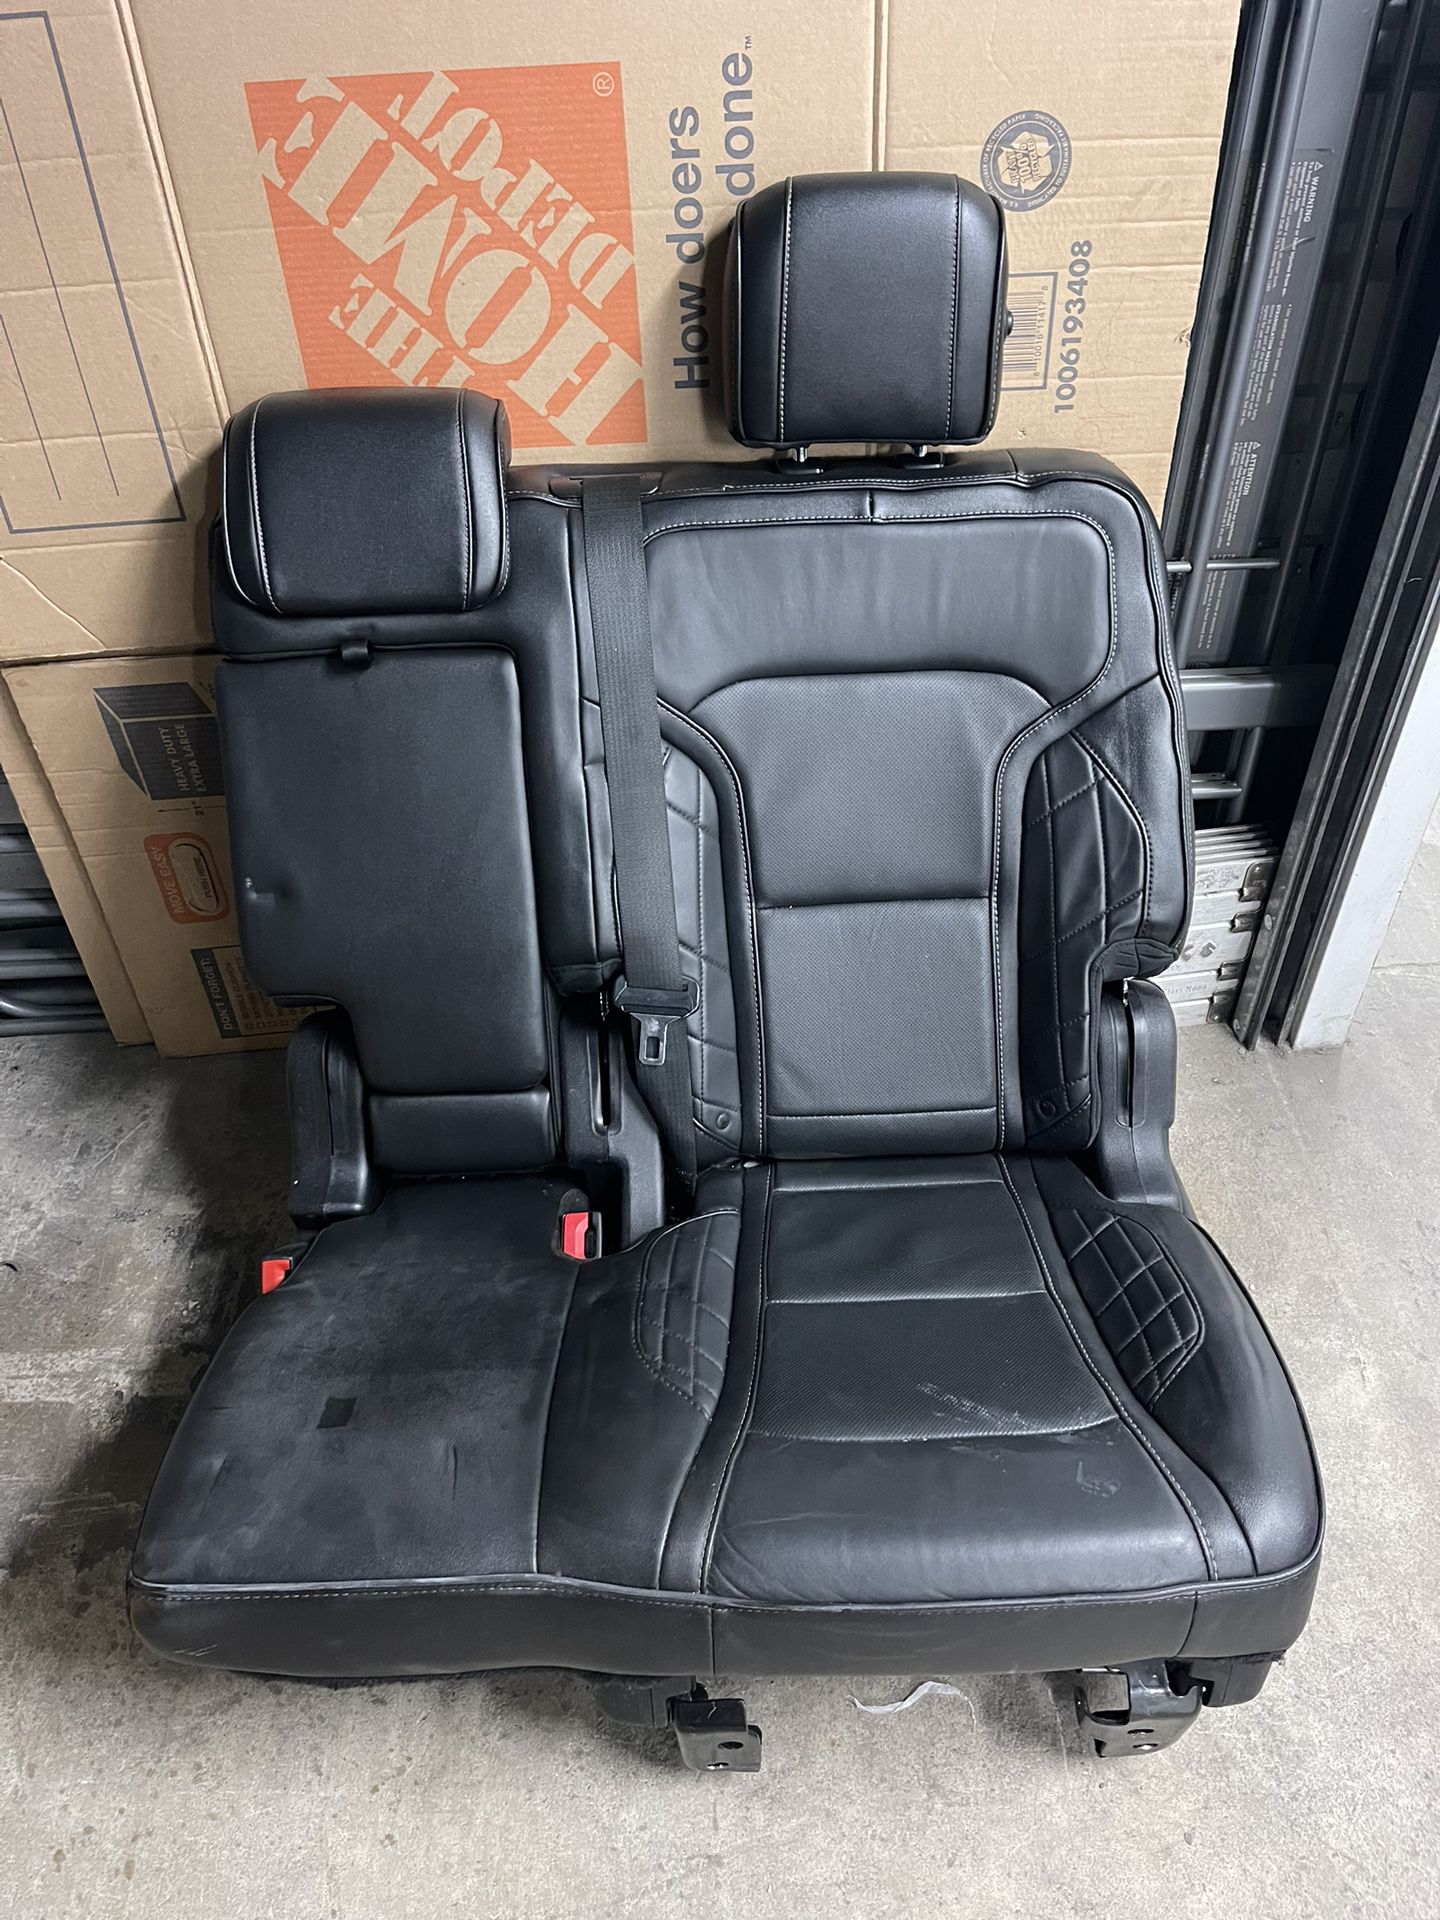 Leather Seat For Ford Explorer Platinum 